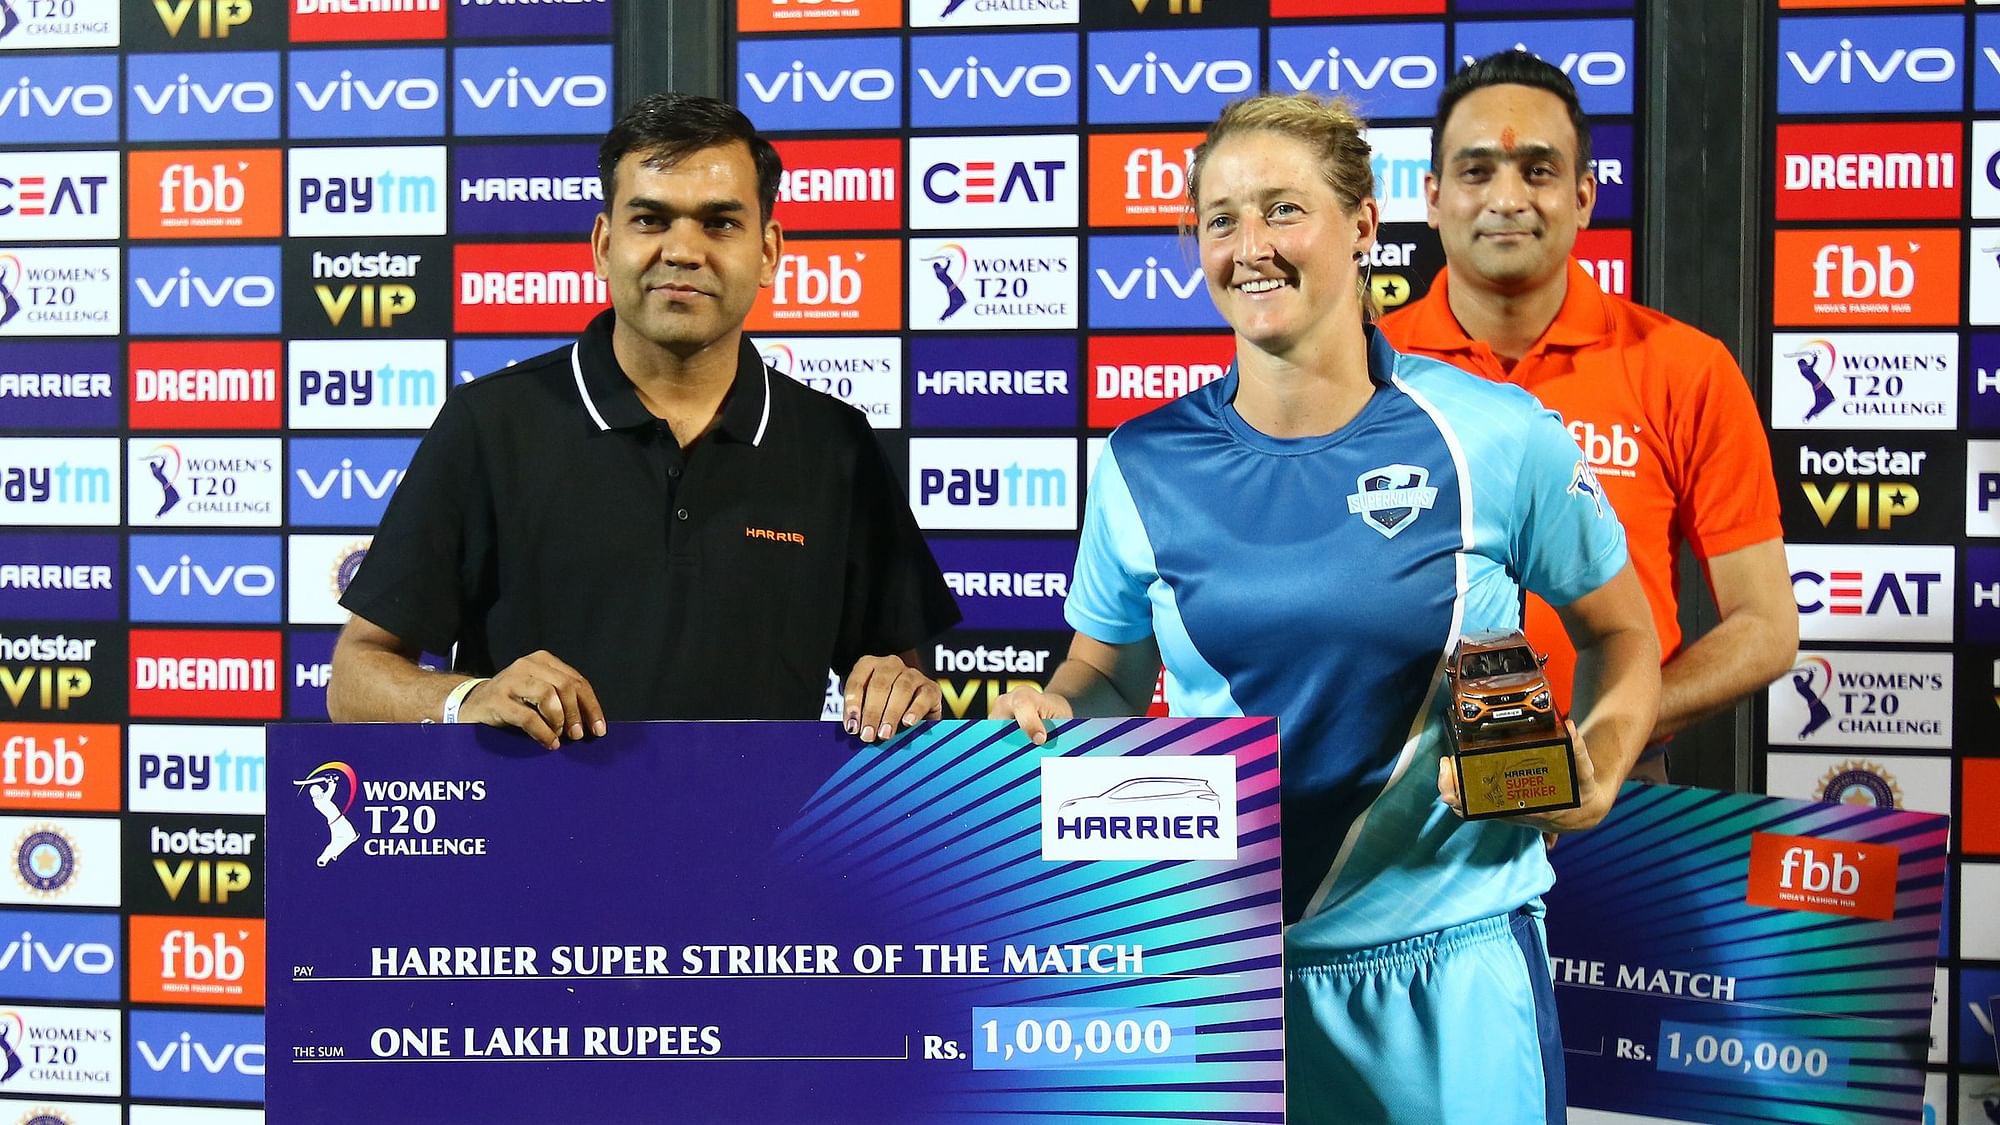 Supernovas receives the Harrier Super Striker of the match award during match 1 of the Women’s T20 Challenge, 2019 between the Supernovas and the Trailblazers.